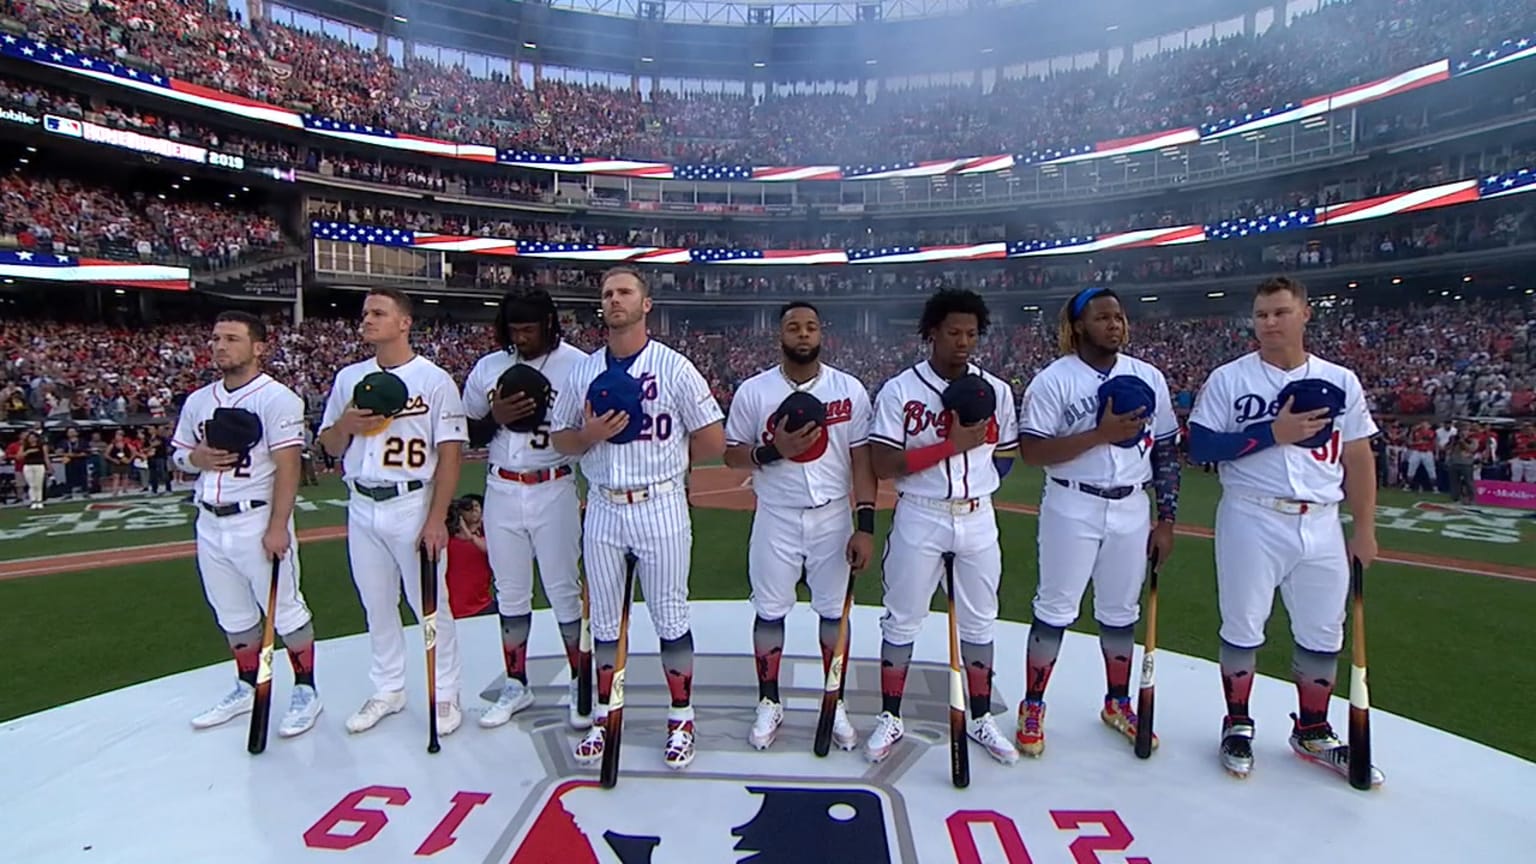 Home Run Derby national anthem 07/09/2019 Los Angeles Dodgers